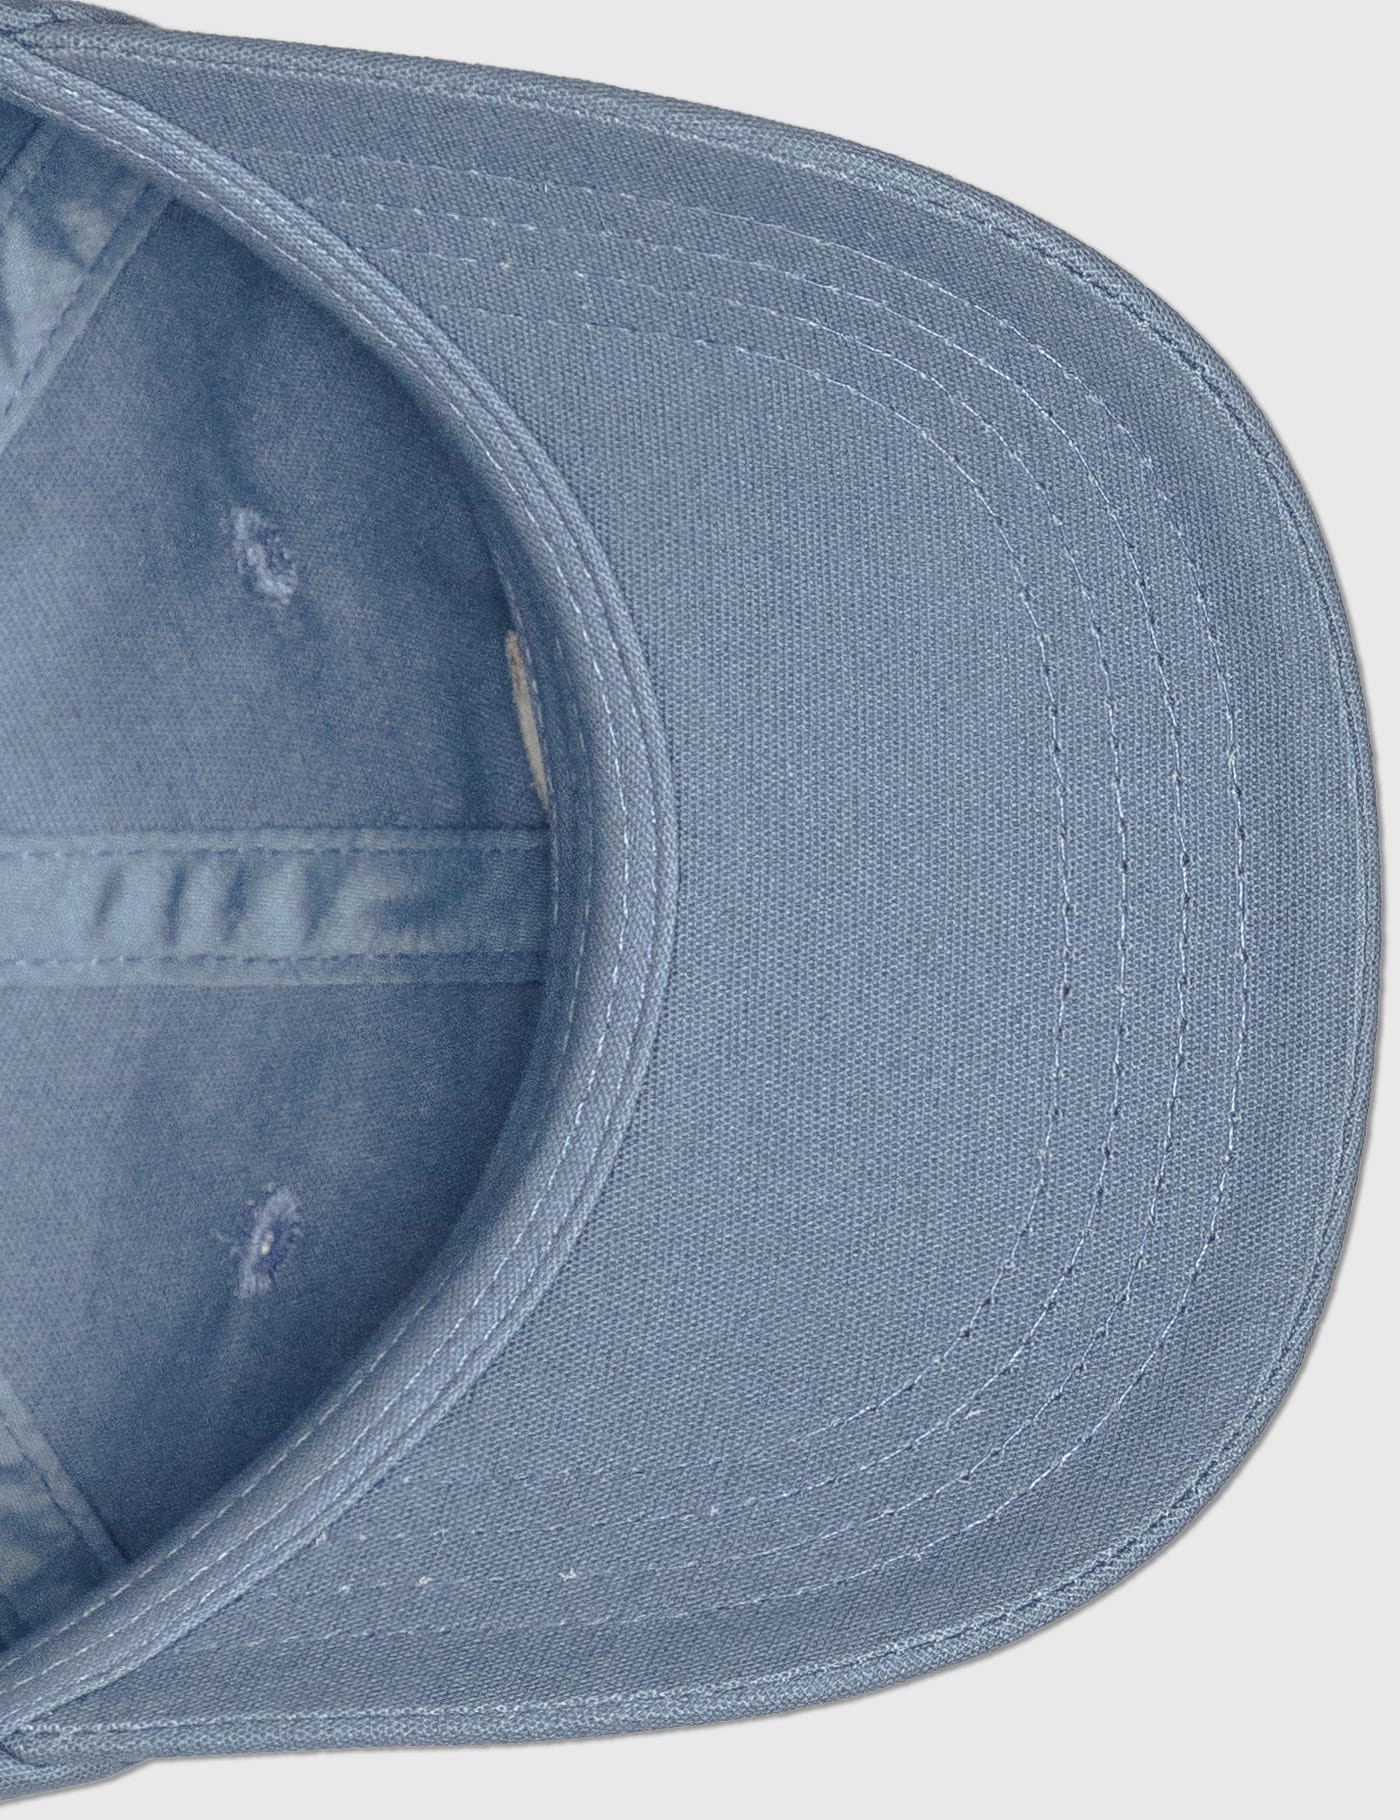 Dime - Dime Underwear Cap | HBX - Globally Curated Fashion and 